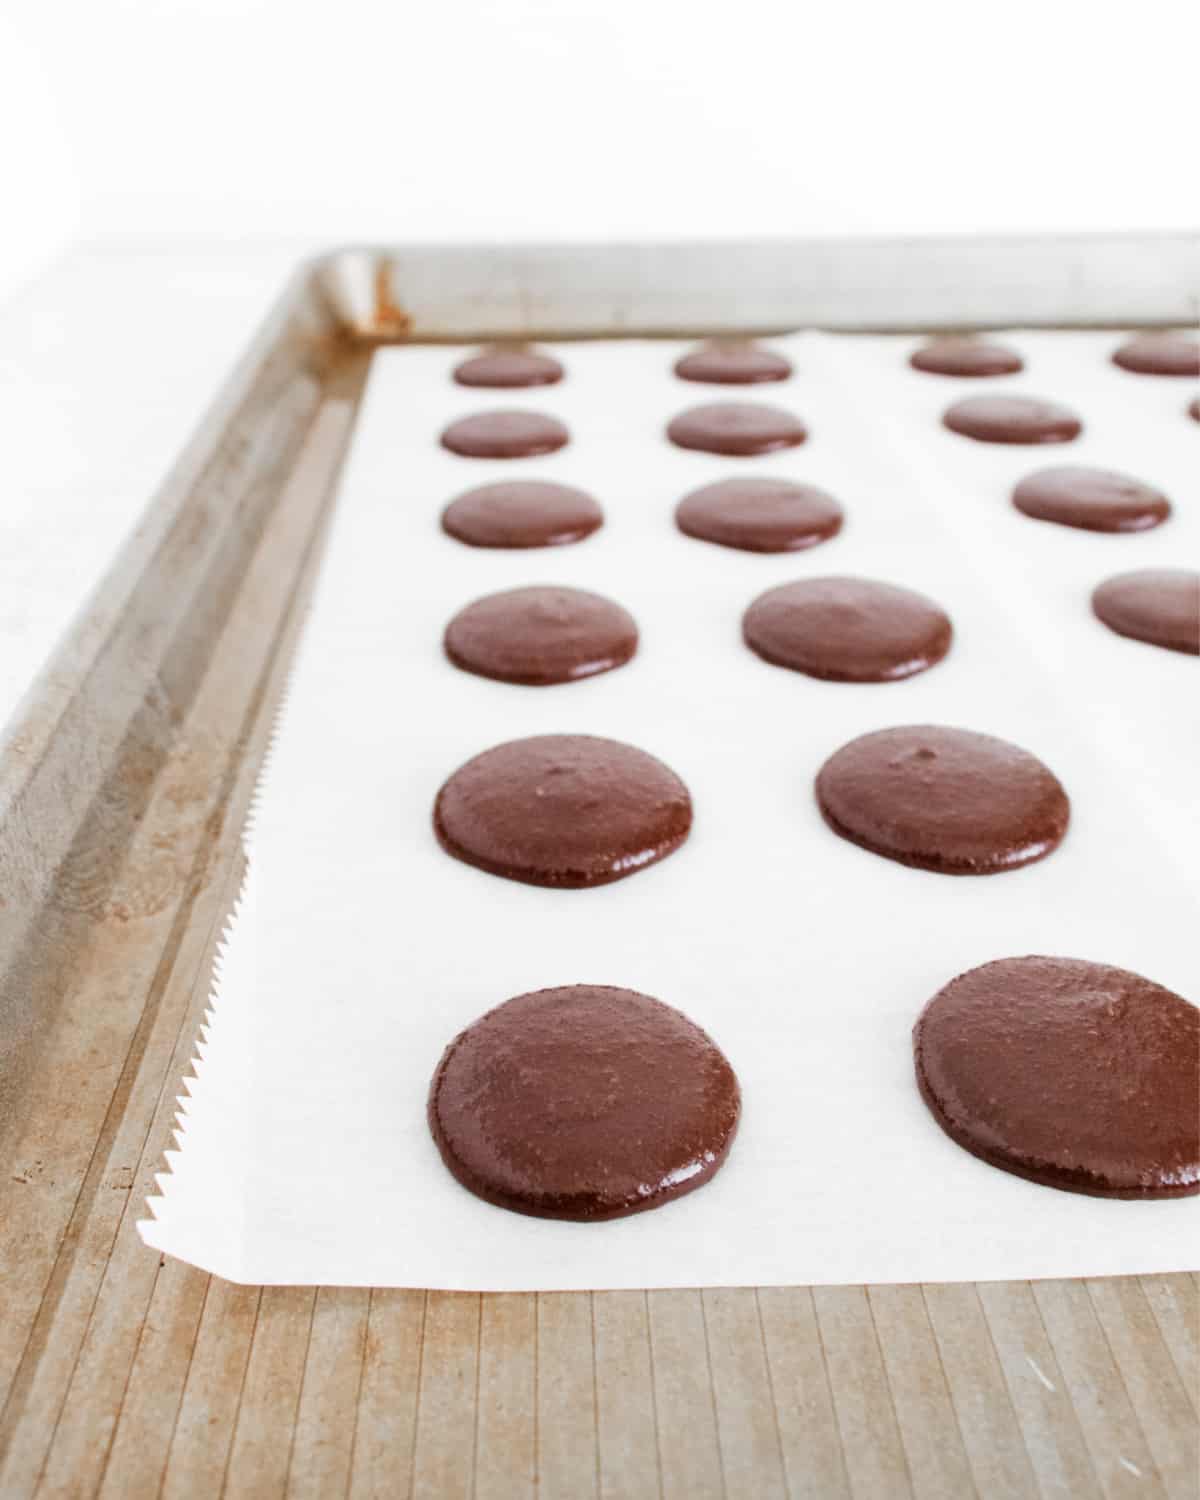 Piped macaron batter on parchment paper lined cookie sheet.